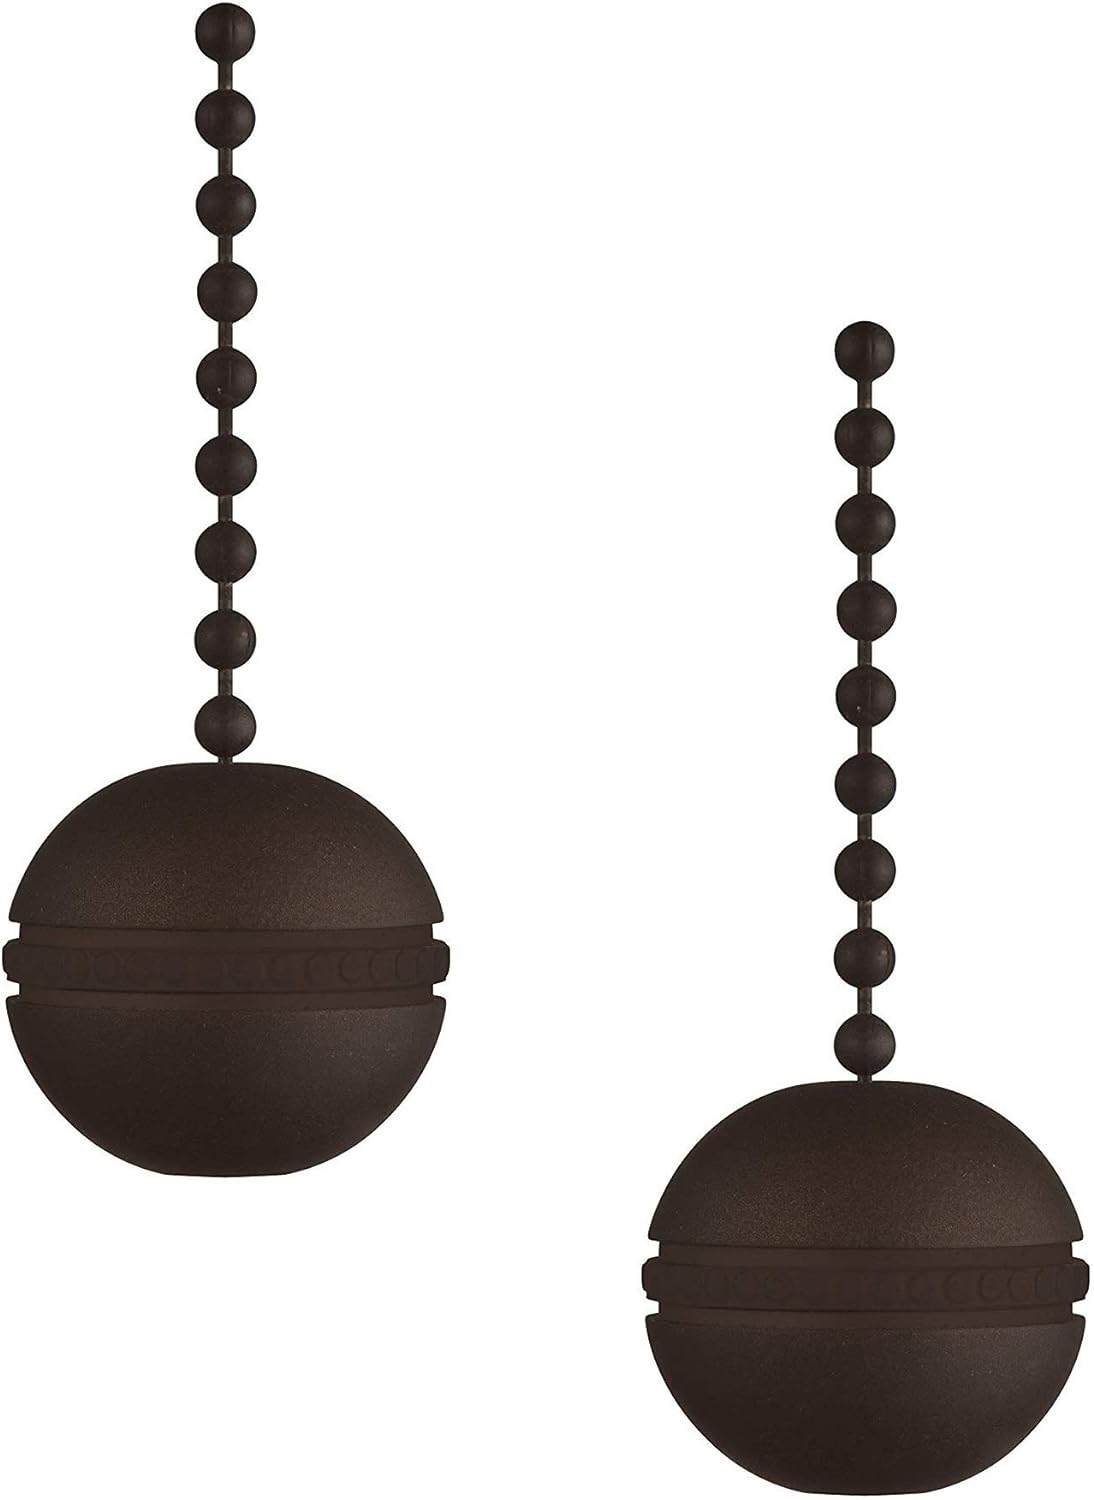 Westinghouse 7709600 Oil Rubbed Bronze Ball Pull Chain , Oil-rubbed Bronze